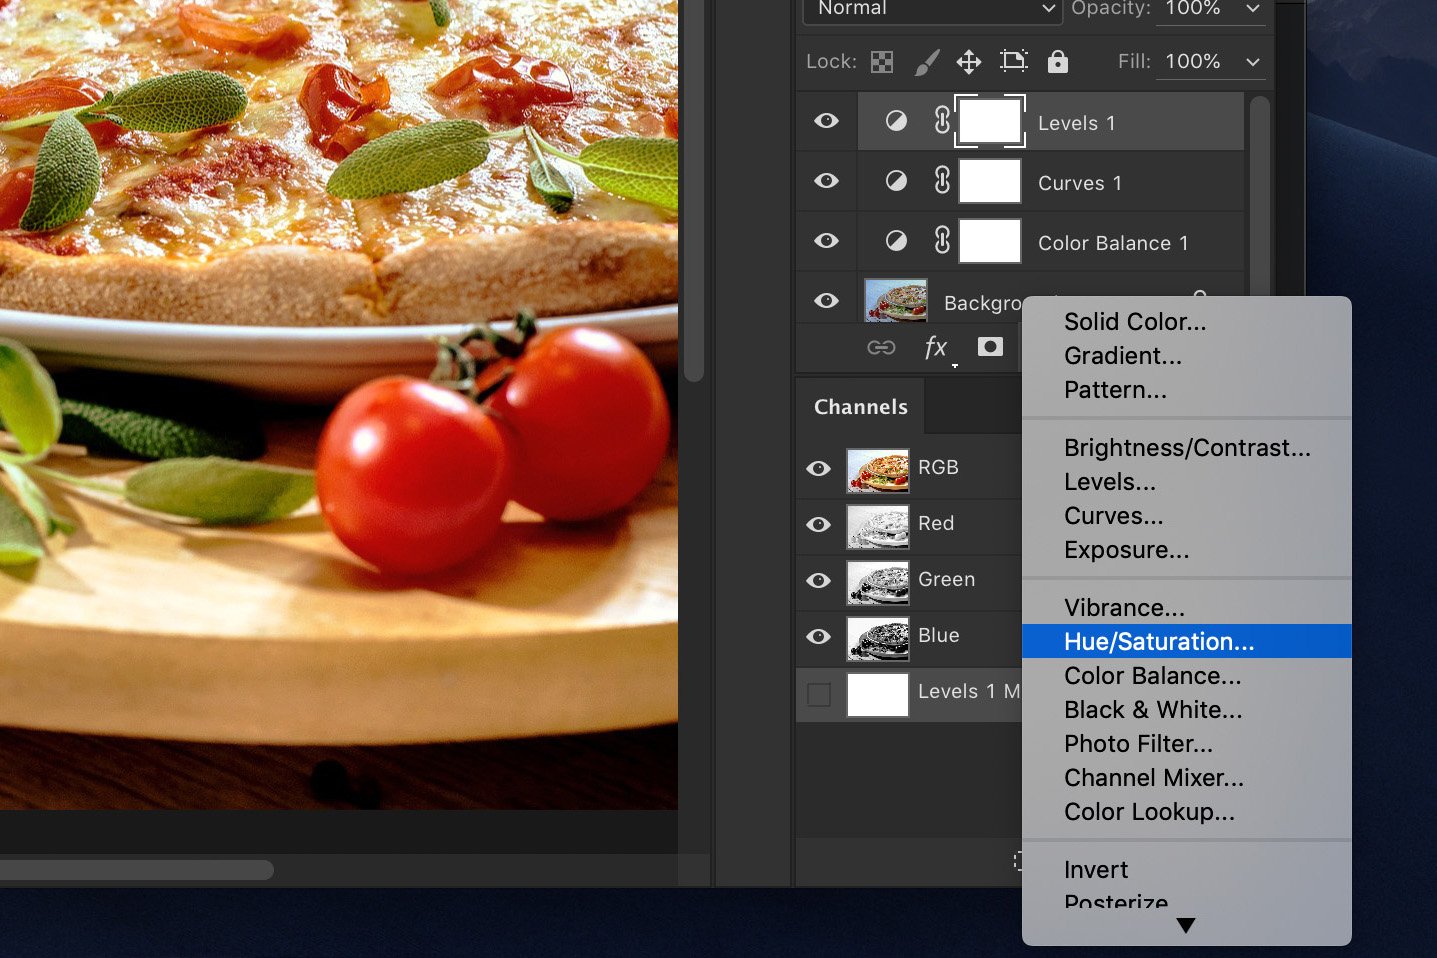 A screenshot showing how to edit food photography in Photoshop - Remove the Remaining Colour Cast 